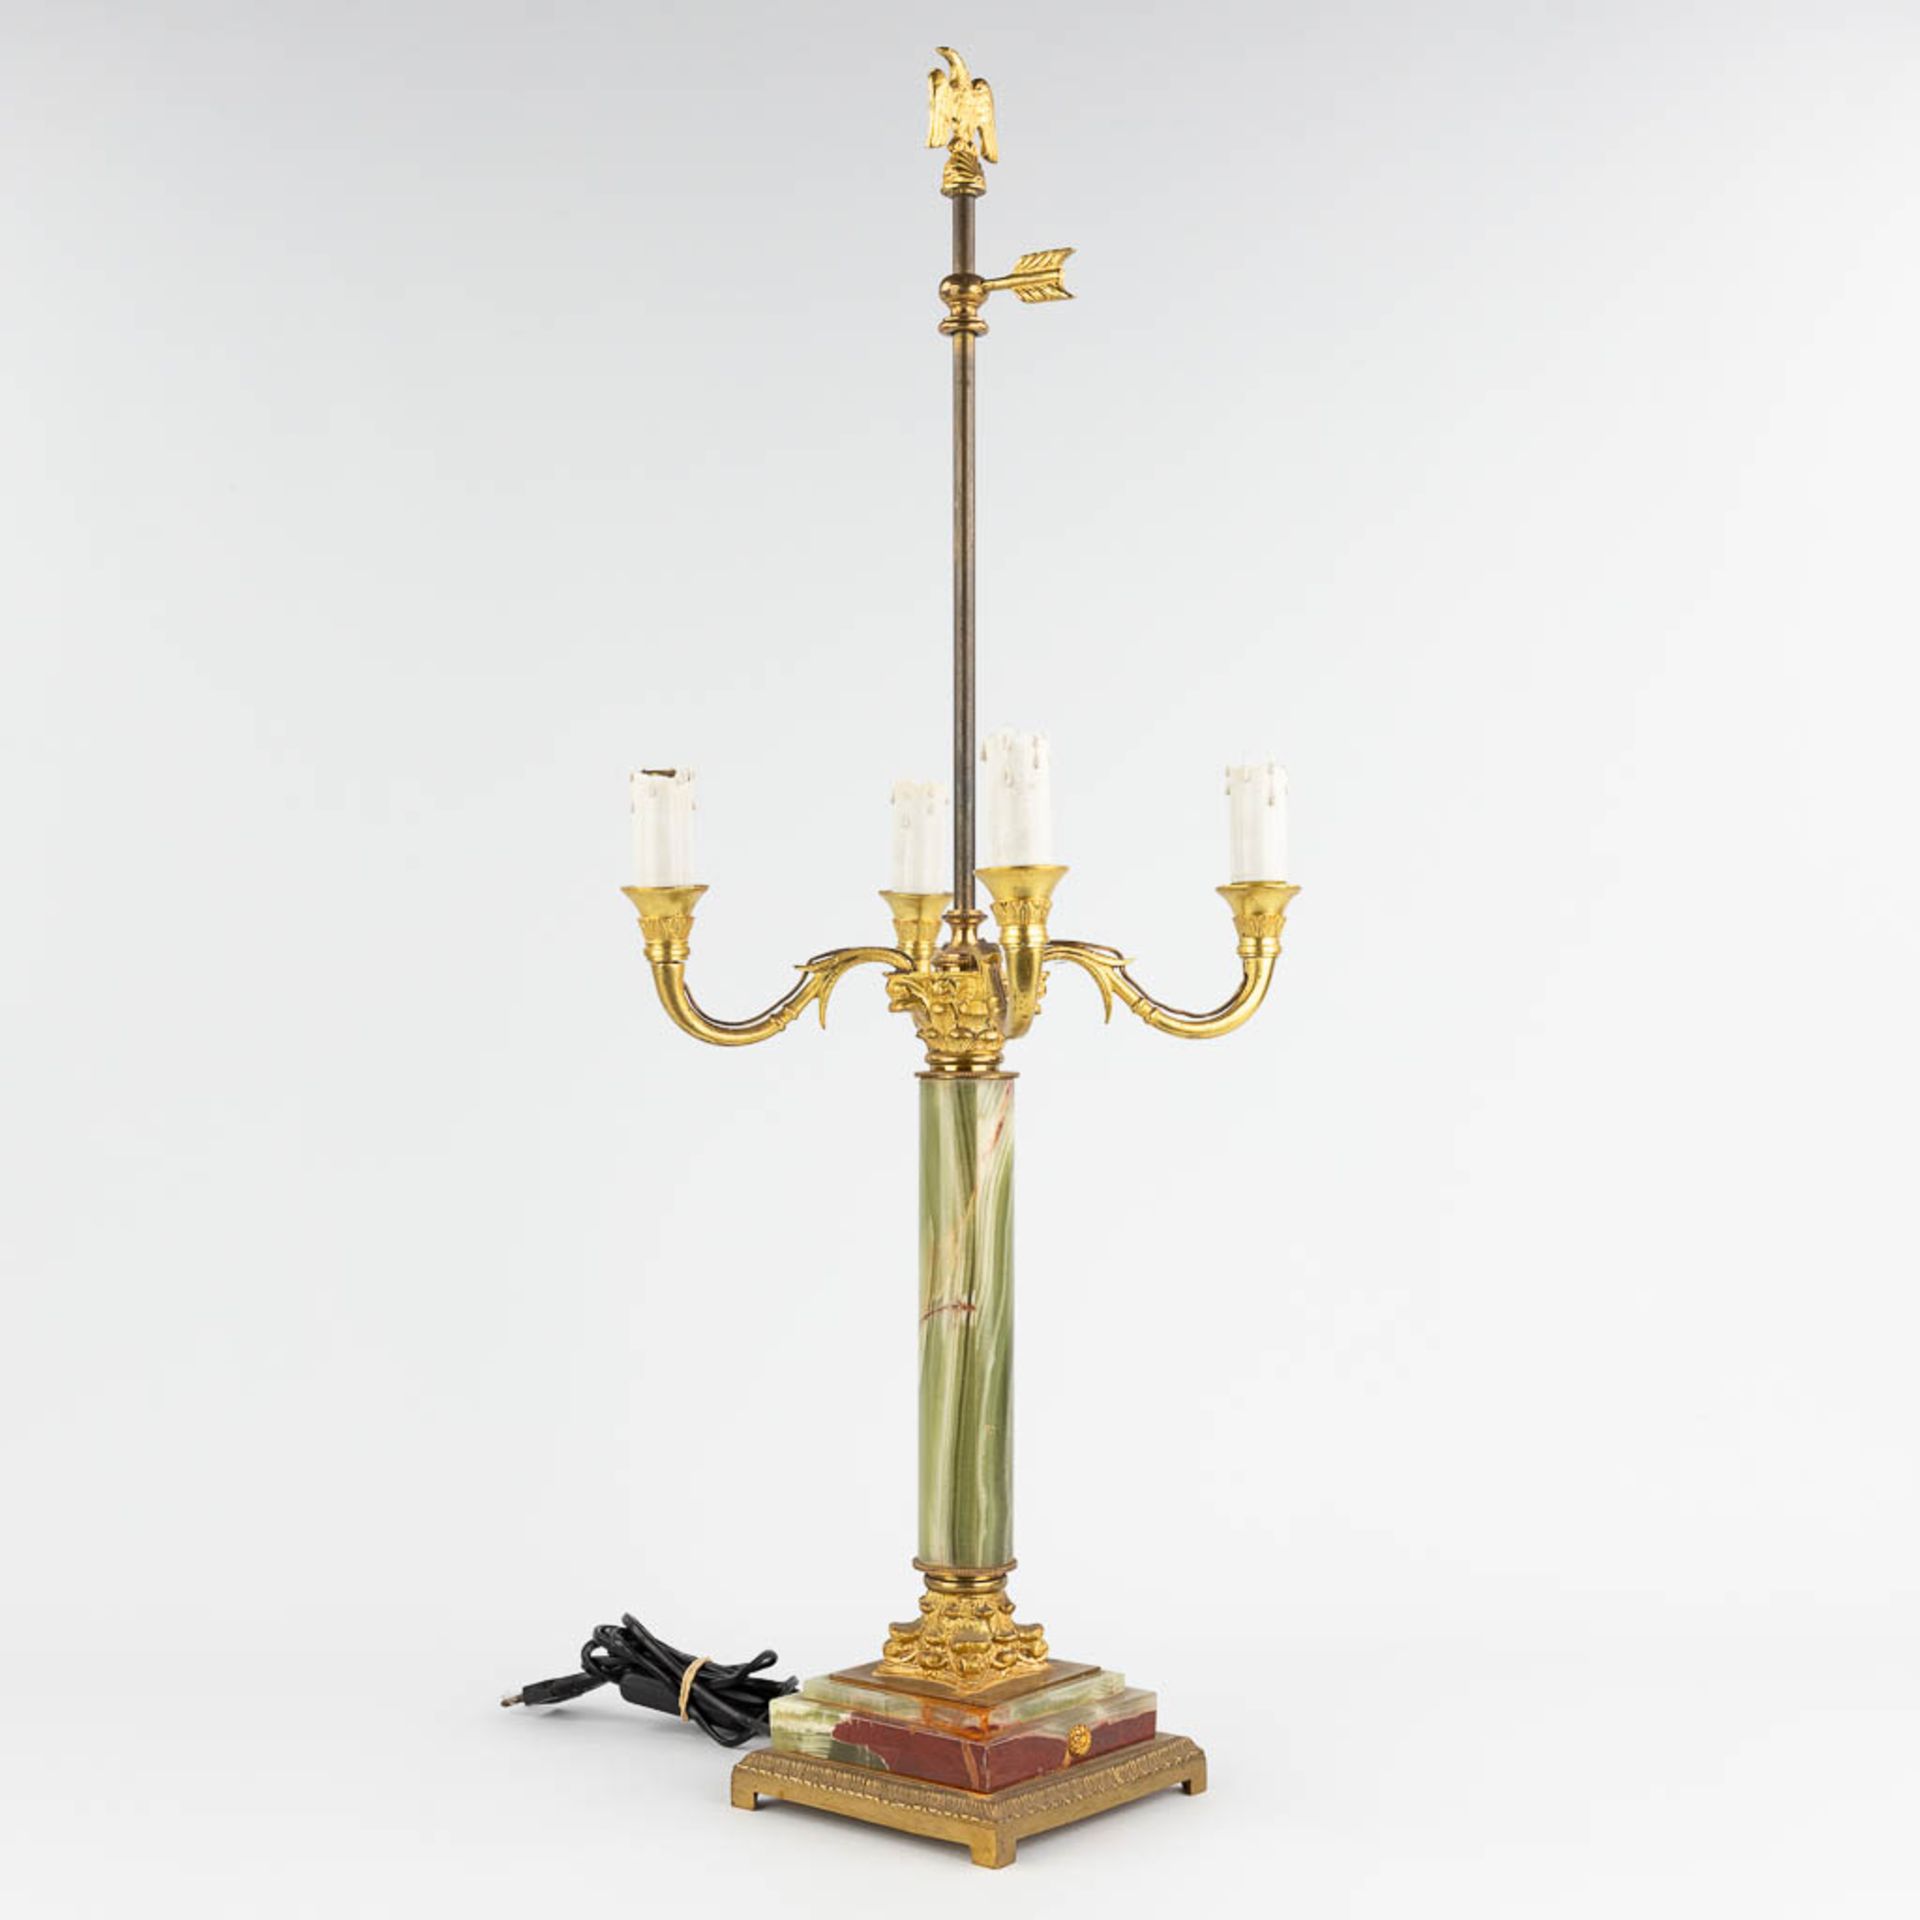 A table lamp, brass and onyx. 20th century. (L: 30 x W: 30 x H: 77 cm) - Image 3 of 13